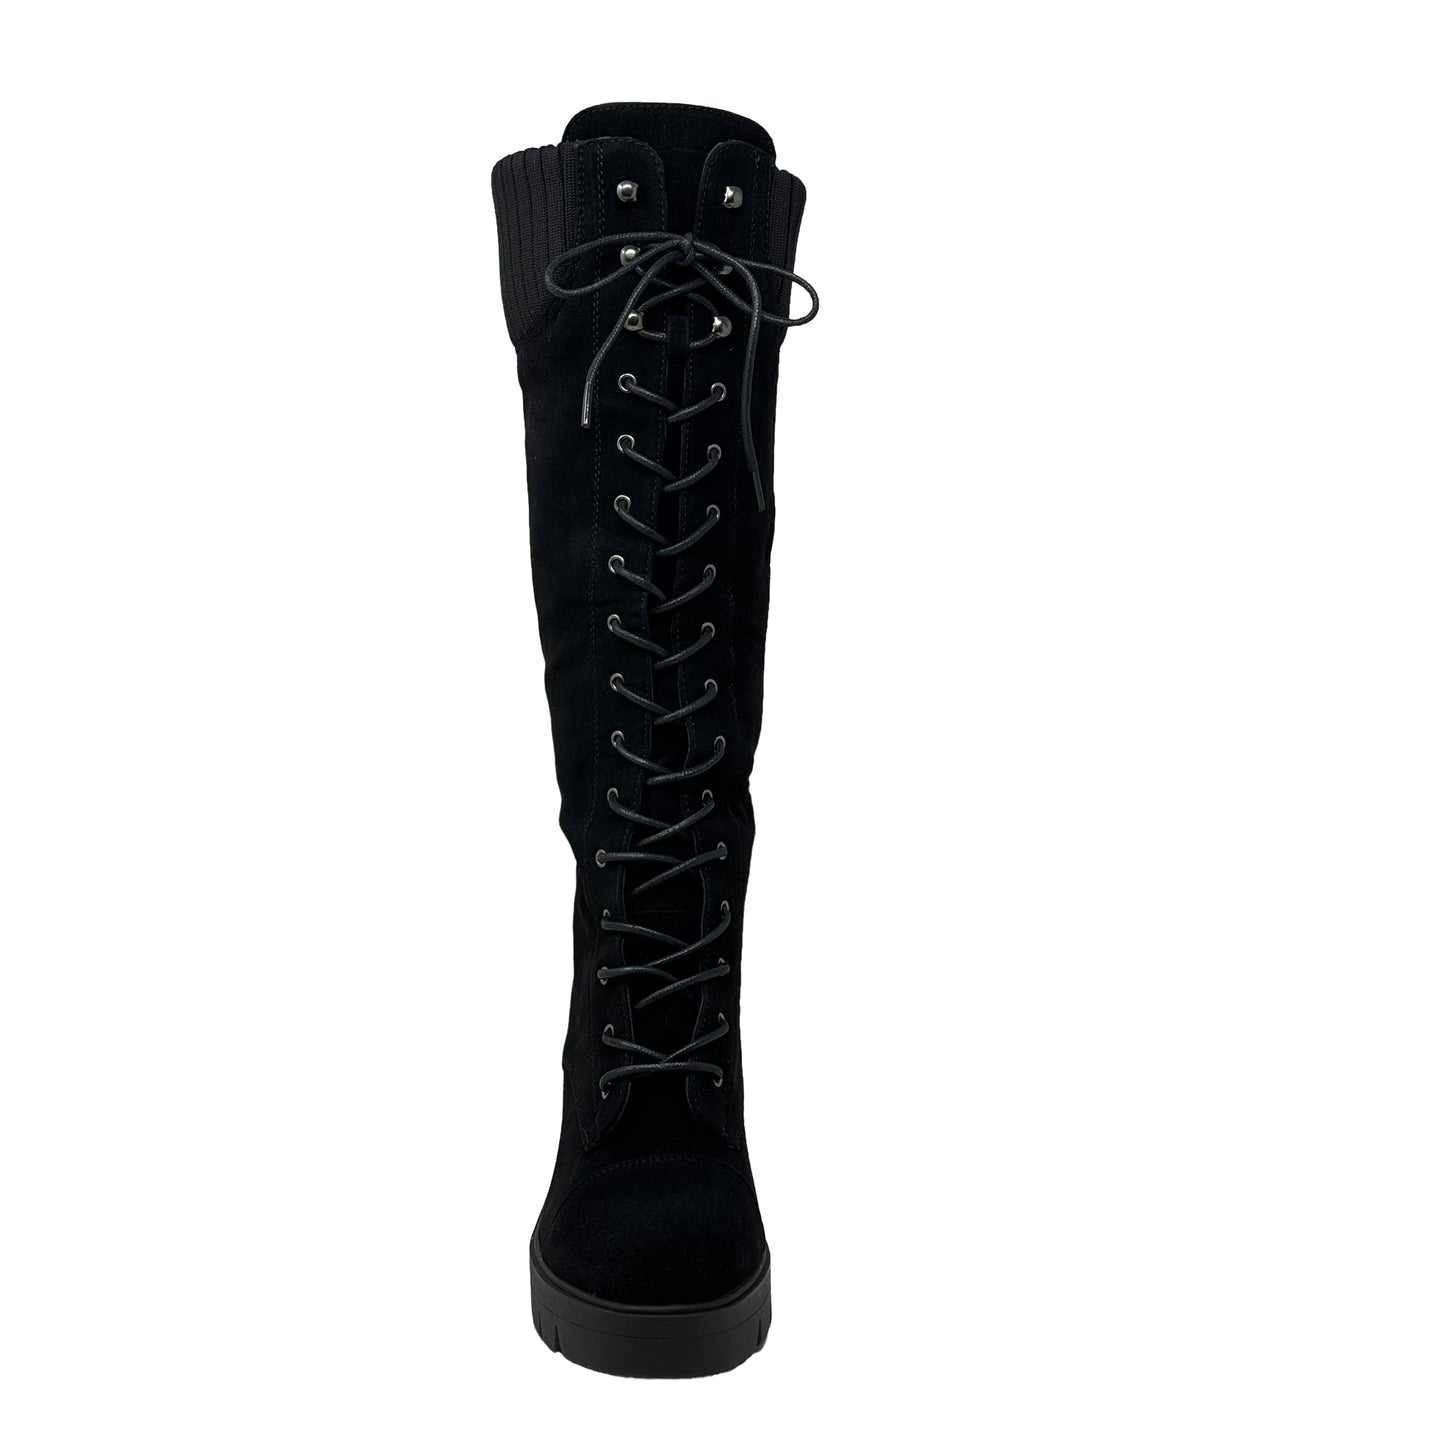 Women's Knee High Combat Boots Lace Up Chunky Heel Knitted Cuff Zipper Closure Black Suede